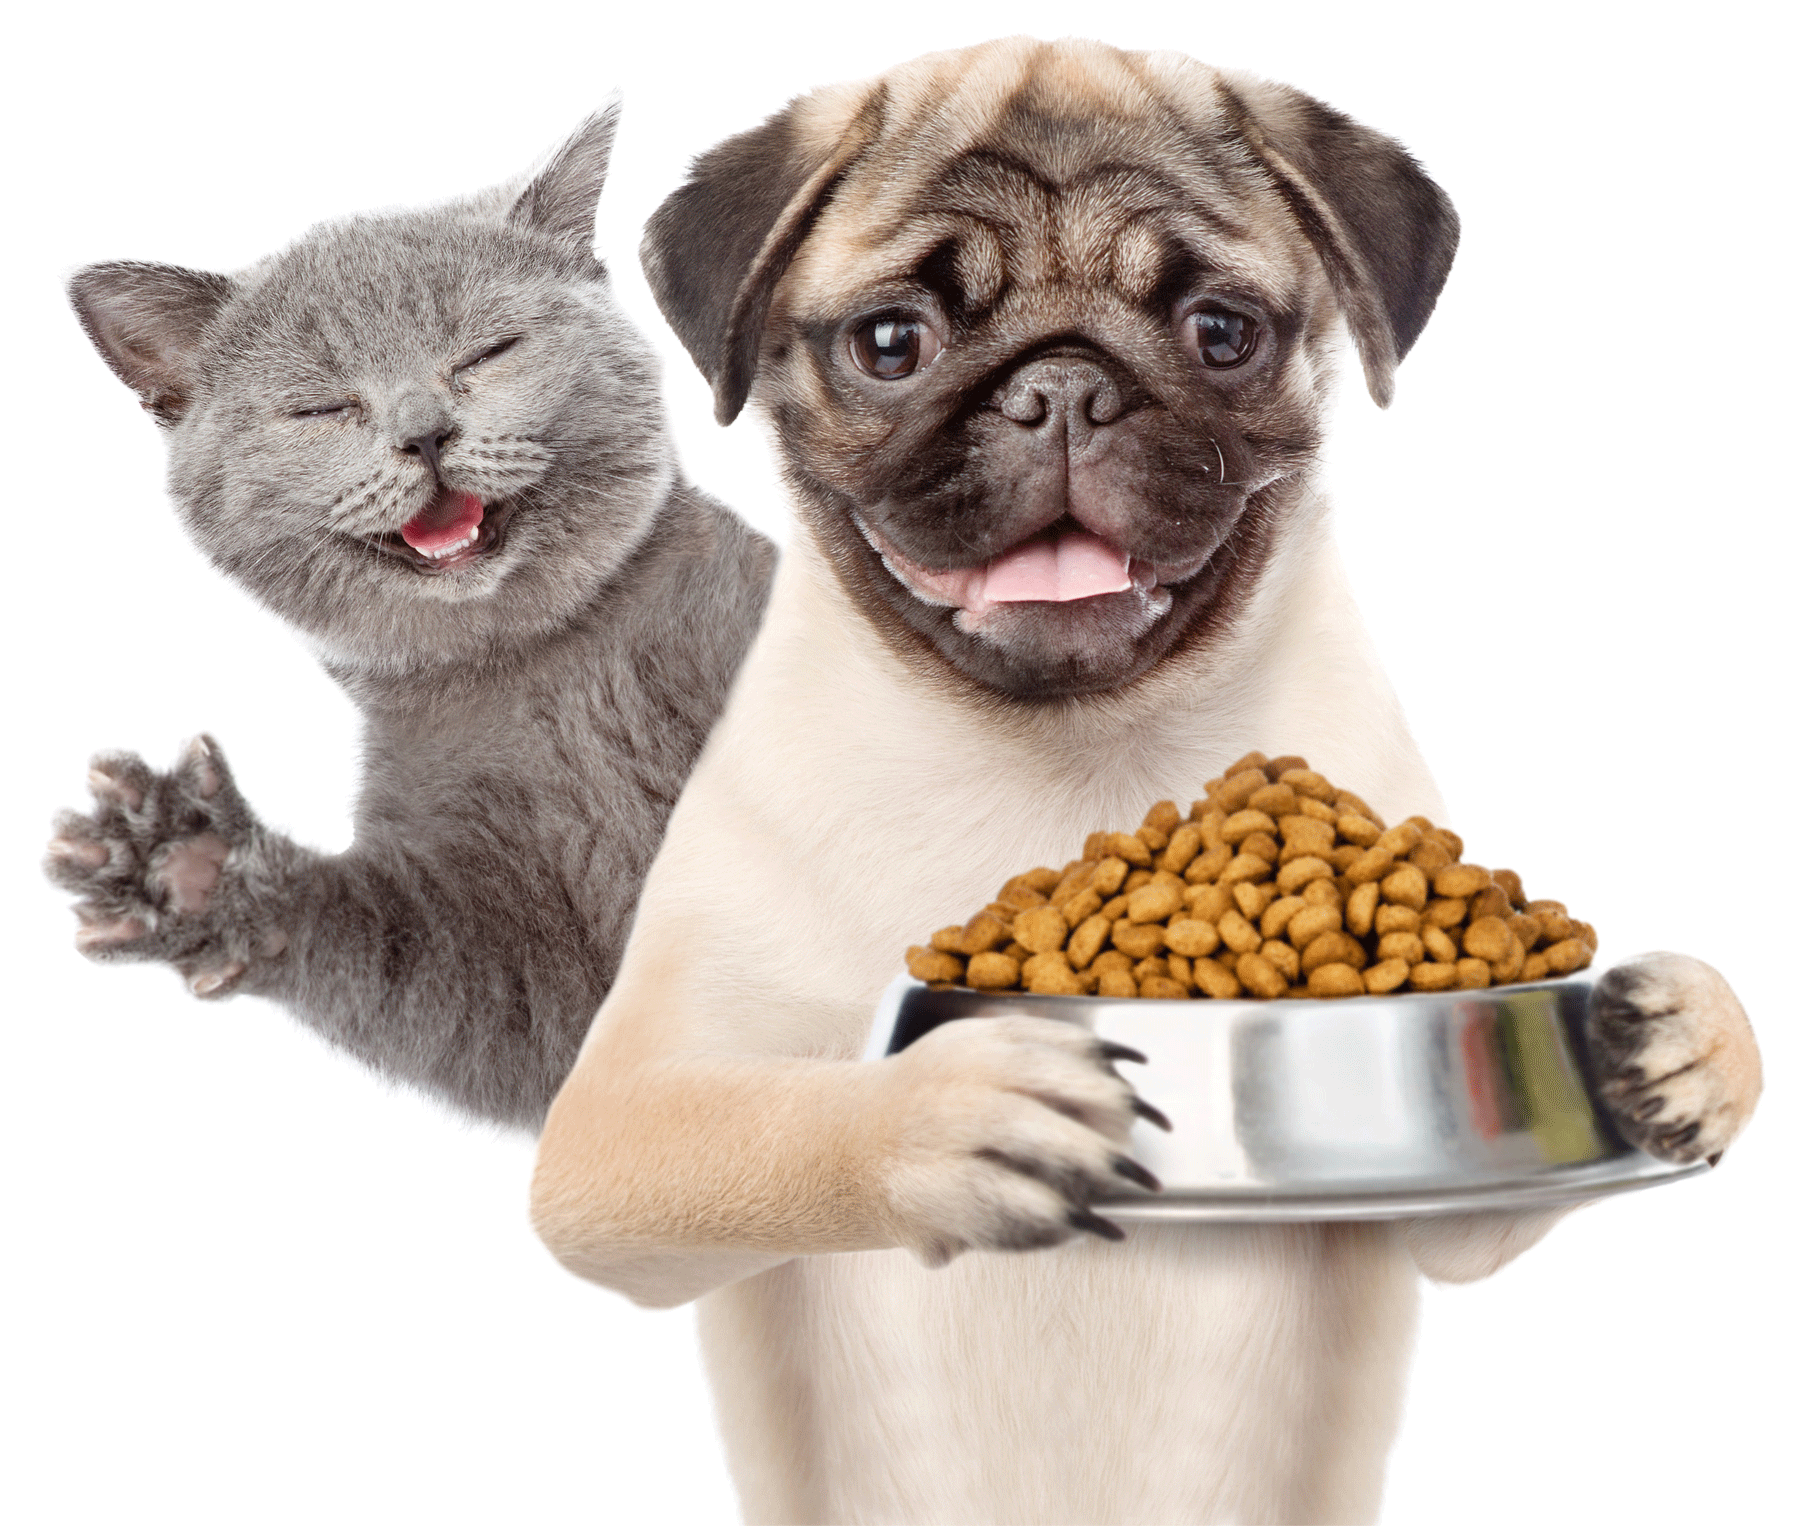 cat and dog holding a bowl of dog foods